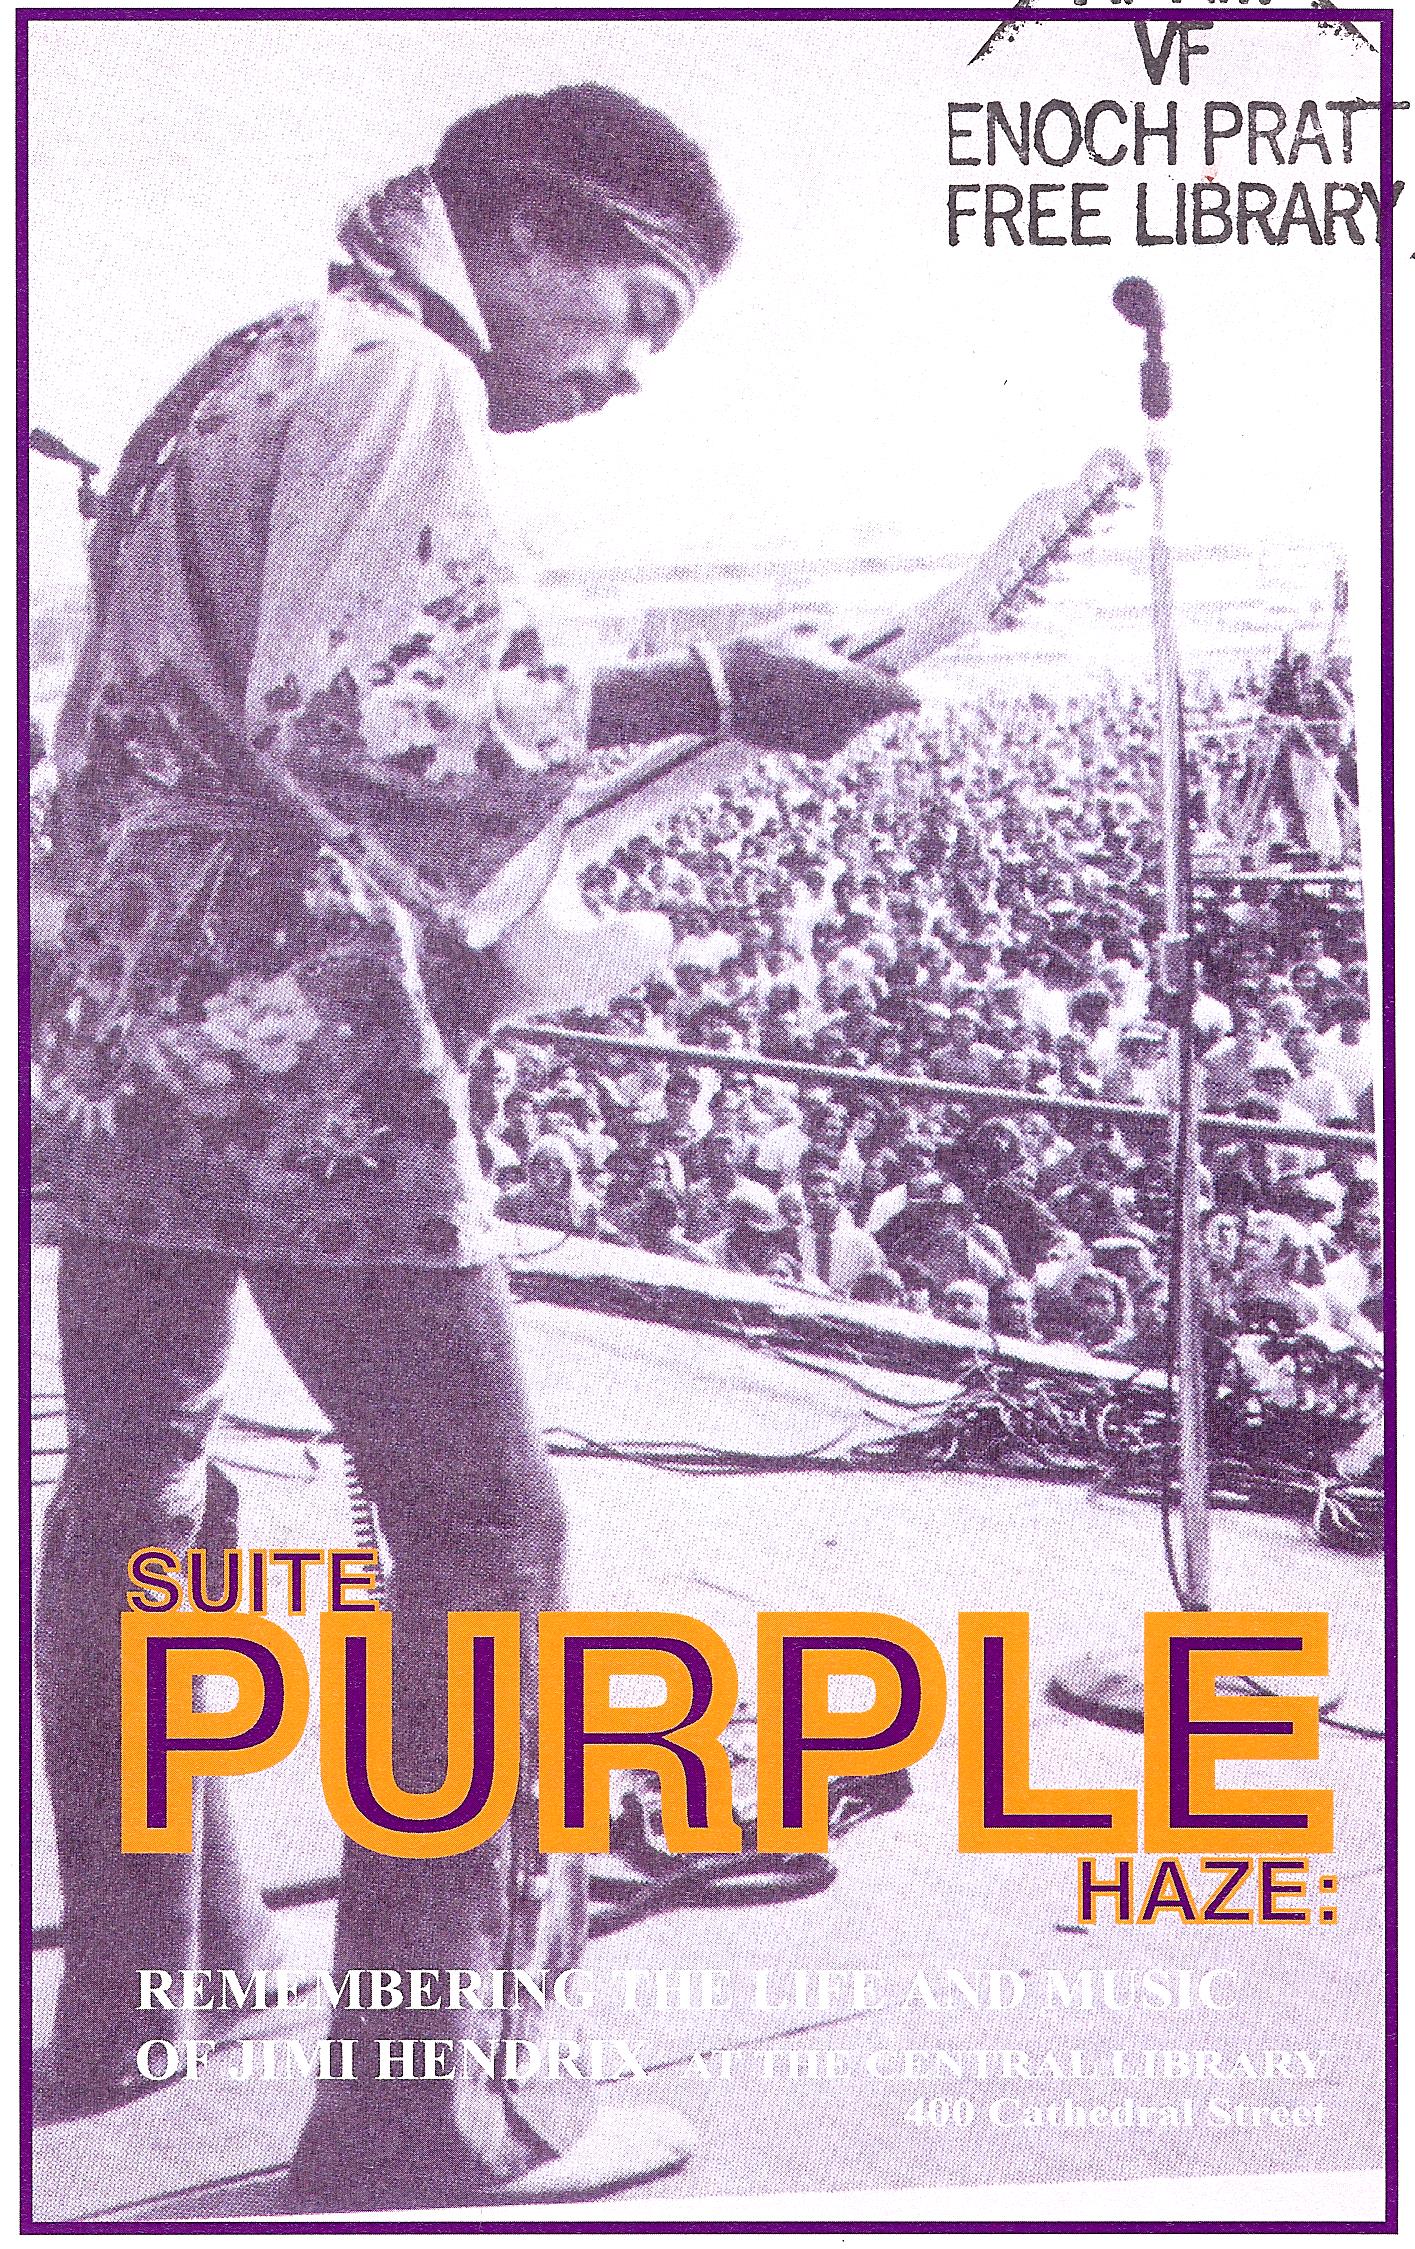 Suite Purple Haze: remembering the Life and Music of Jimi Hendrix